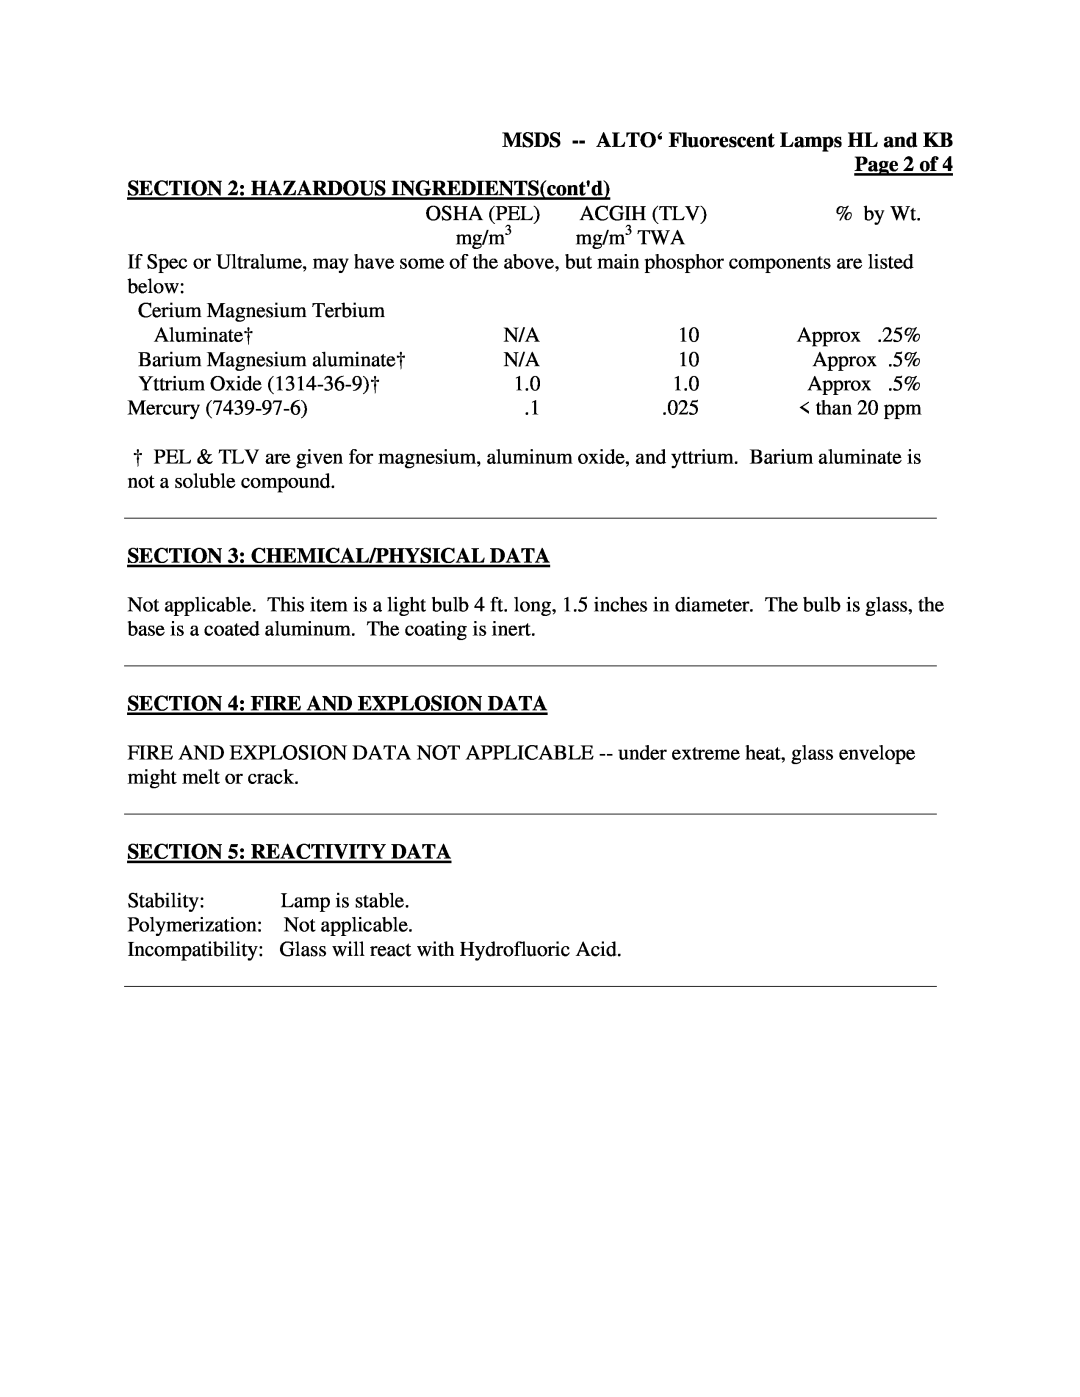 Philips S06-01001 MSDS --ALTO‘ Fluorescent Lamps HL and KB, Page 2 of, HAZARDOUS INGREDIENTScontd, Chemical/Physical Data 